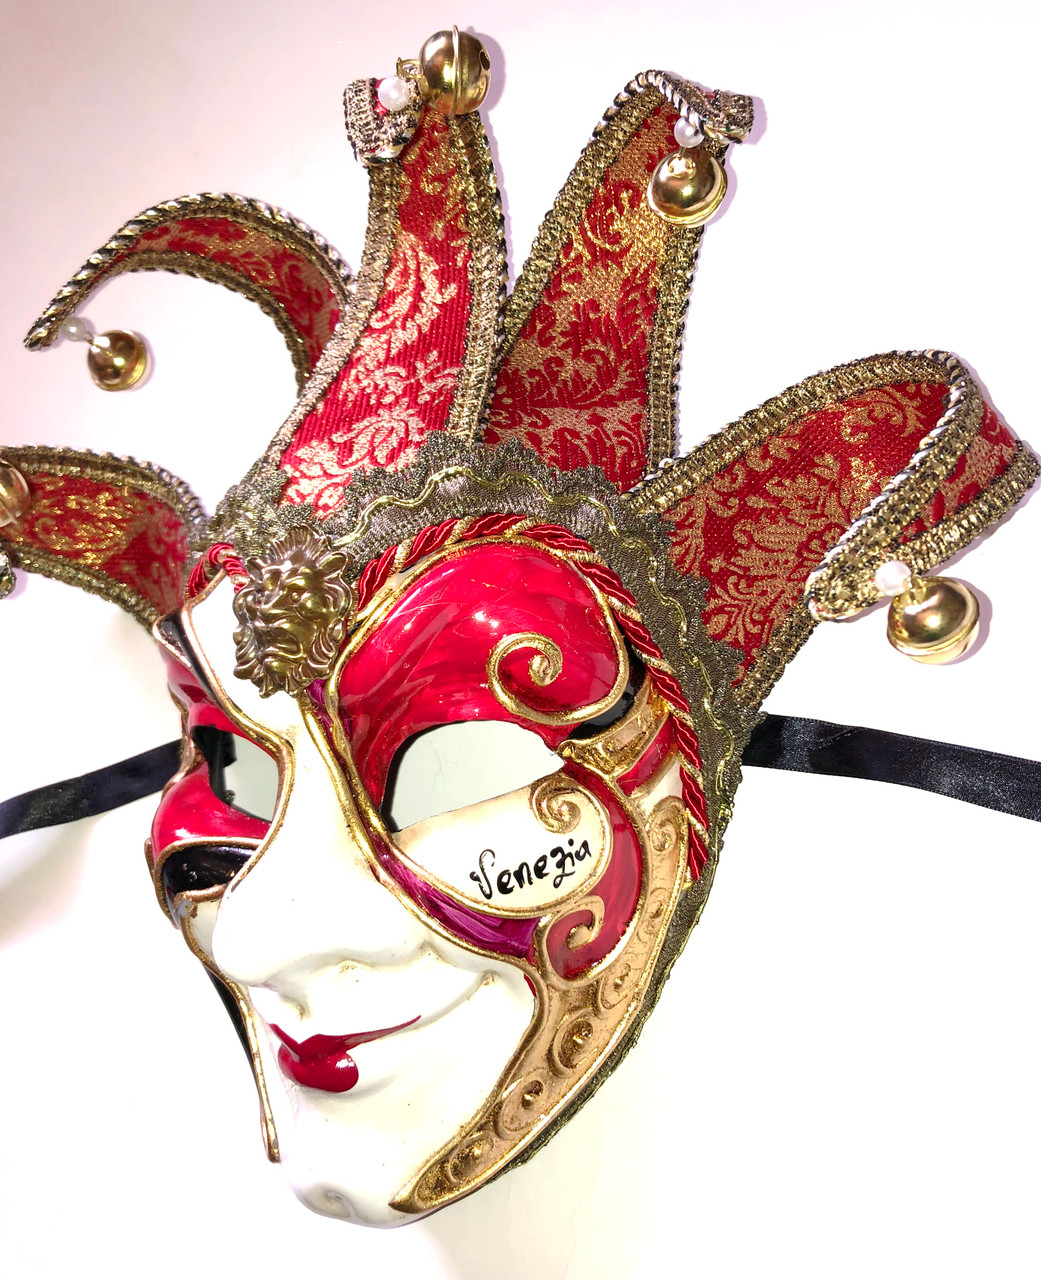 Joker Mask - Jester Masquerade Mask - Full Face Venetian Mask Gold and Red/Gold and White- Home Decor, Interior Design Mask F29/F30